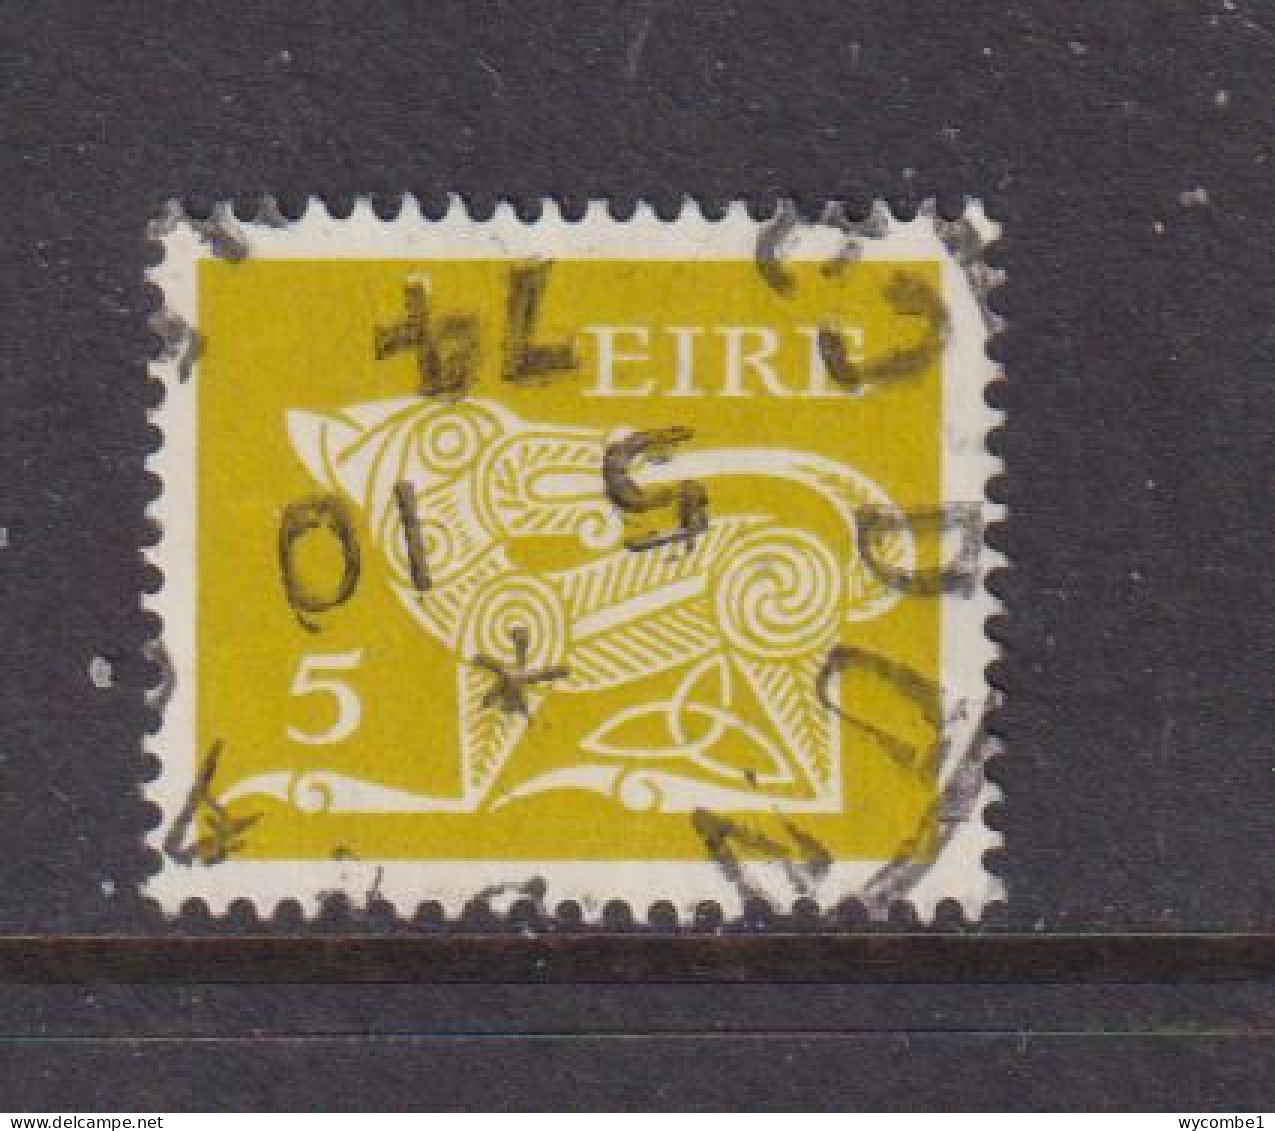 IRELAND - 1971  Decimal Currency Definitives  5p  Used As Scan - Oblitérés